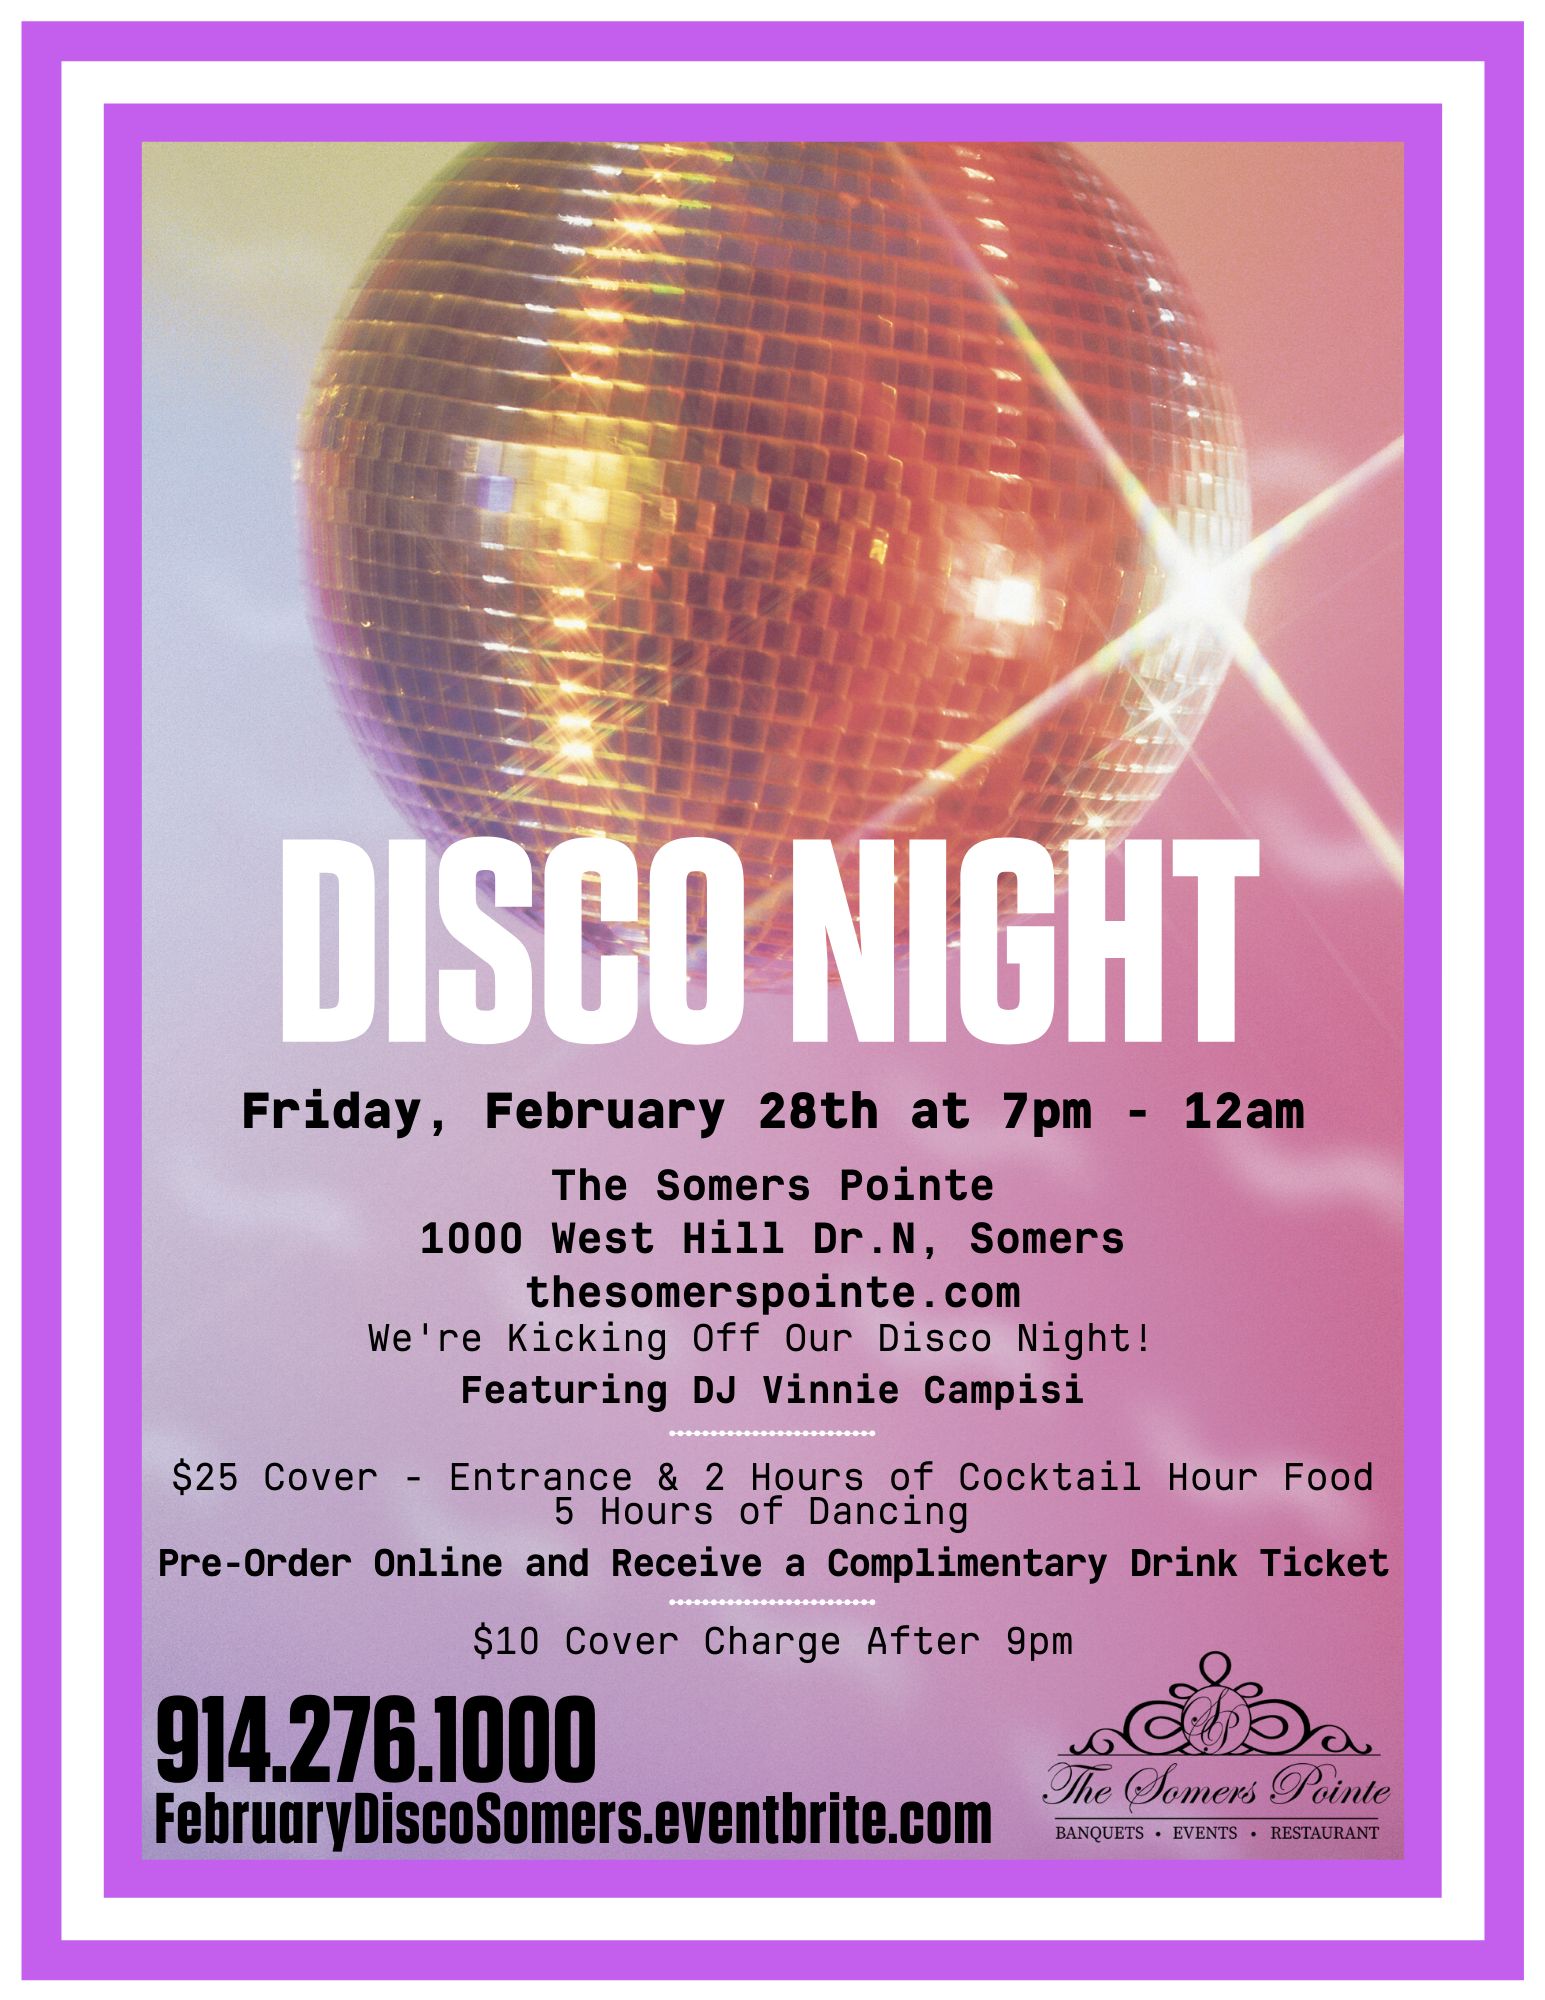 70s and 80s Disco Featuring DJ Vinnie Campisi | The Somers Pointe